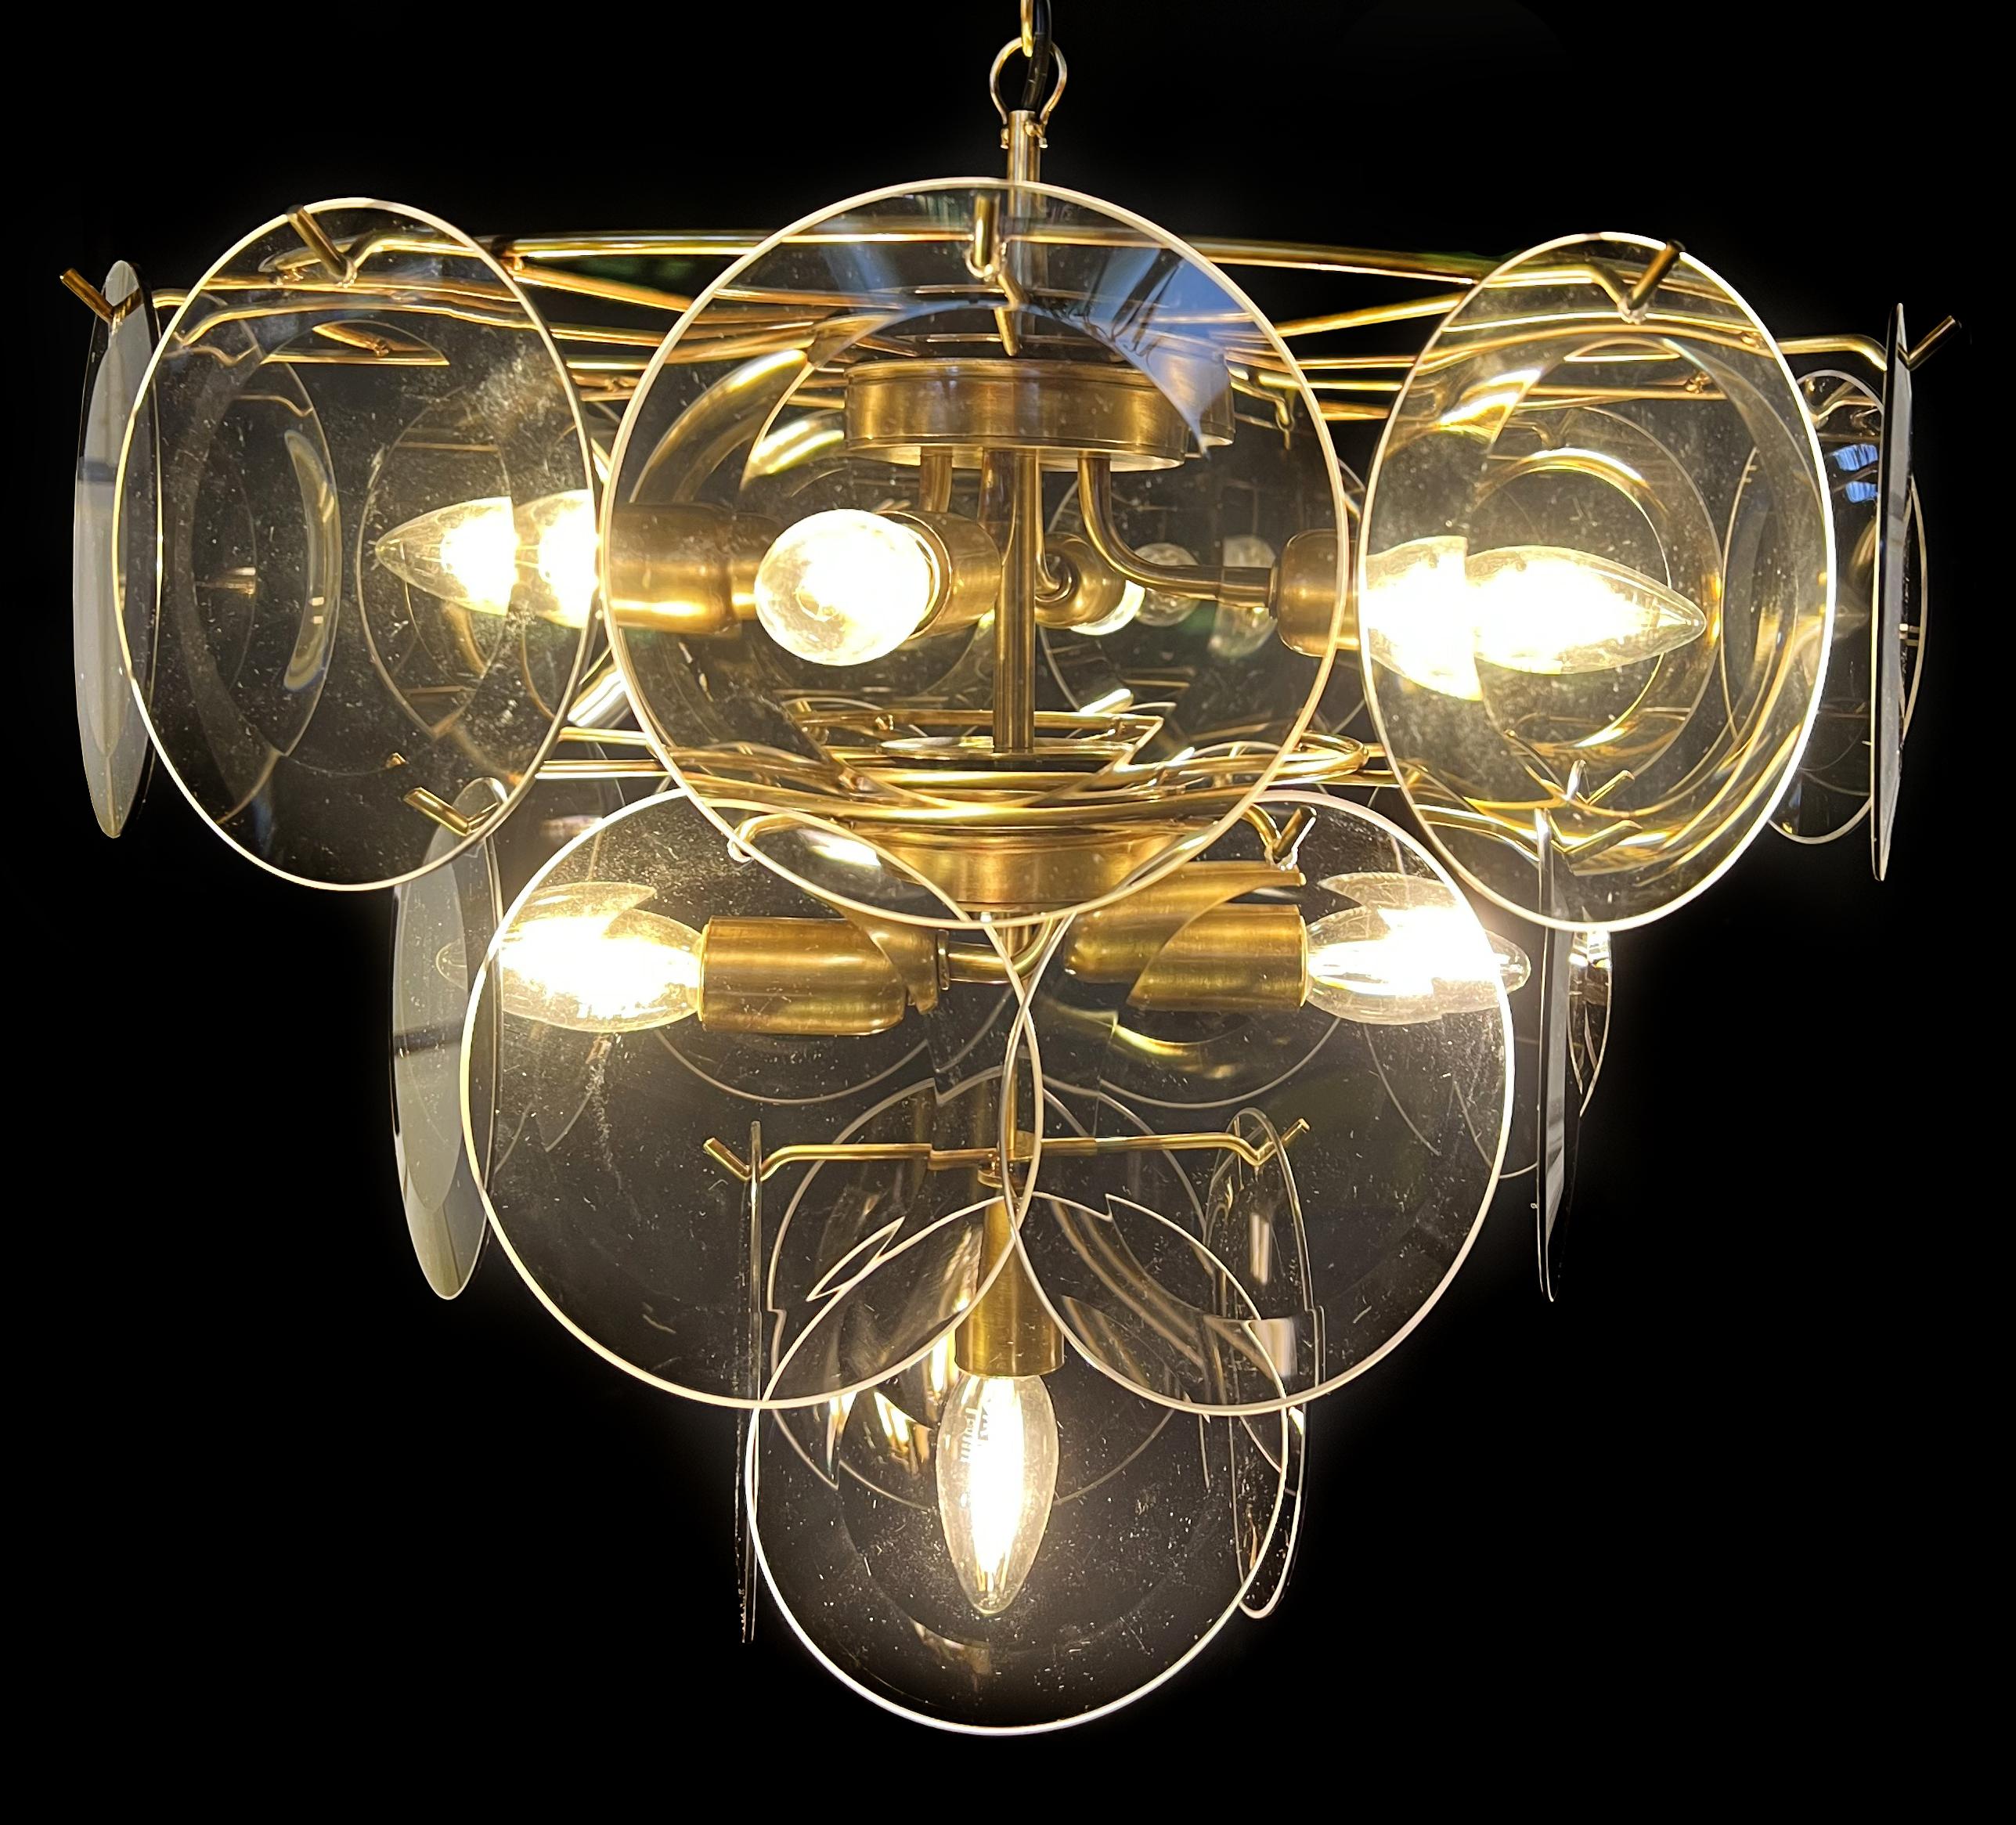 Vintage Italian Murano chandelier by Vistosi. The chandelier has 23 fantastic  fumé discs in a gold metal frame.
Period: late XX century
Dimensions: 44,50 inches (150 cm) height with chain; 19,40 inches (50 cm) height without chain; 19,40 inches (50